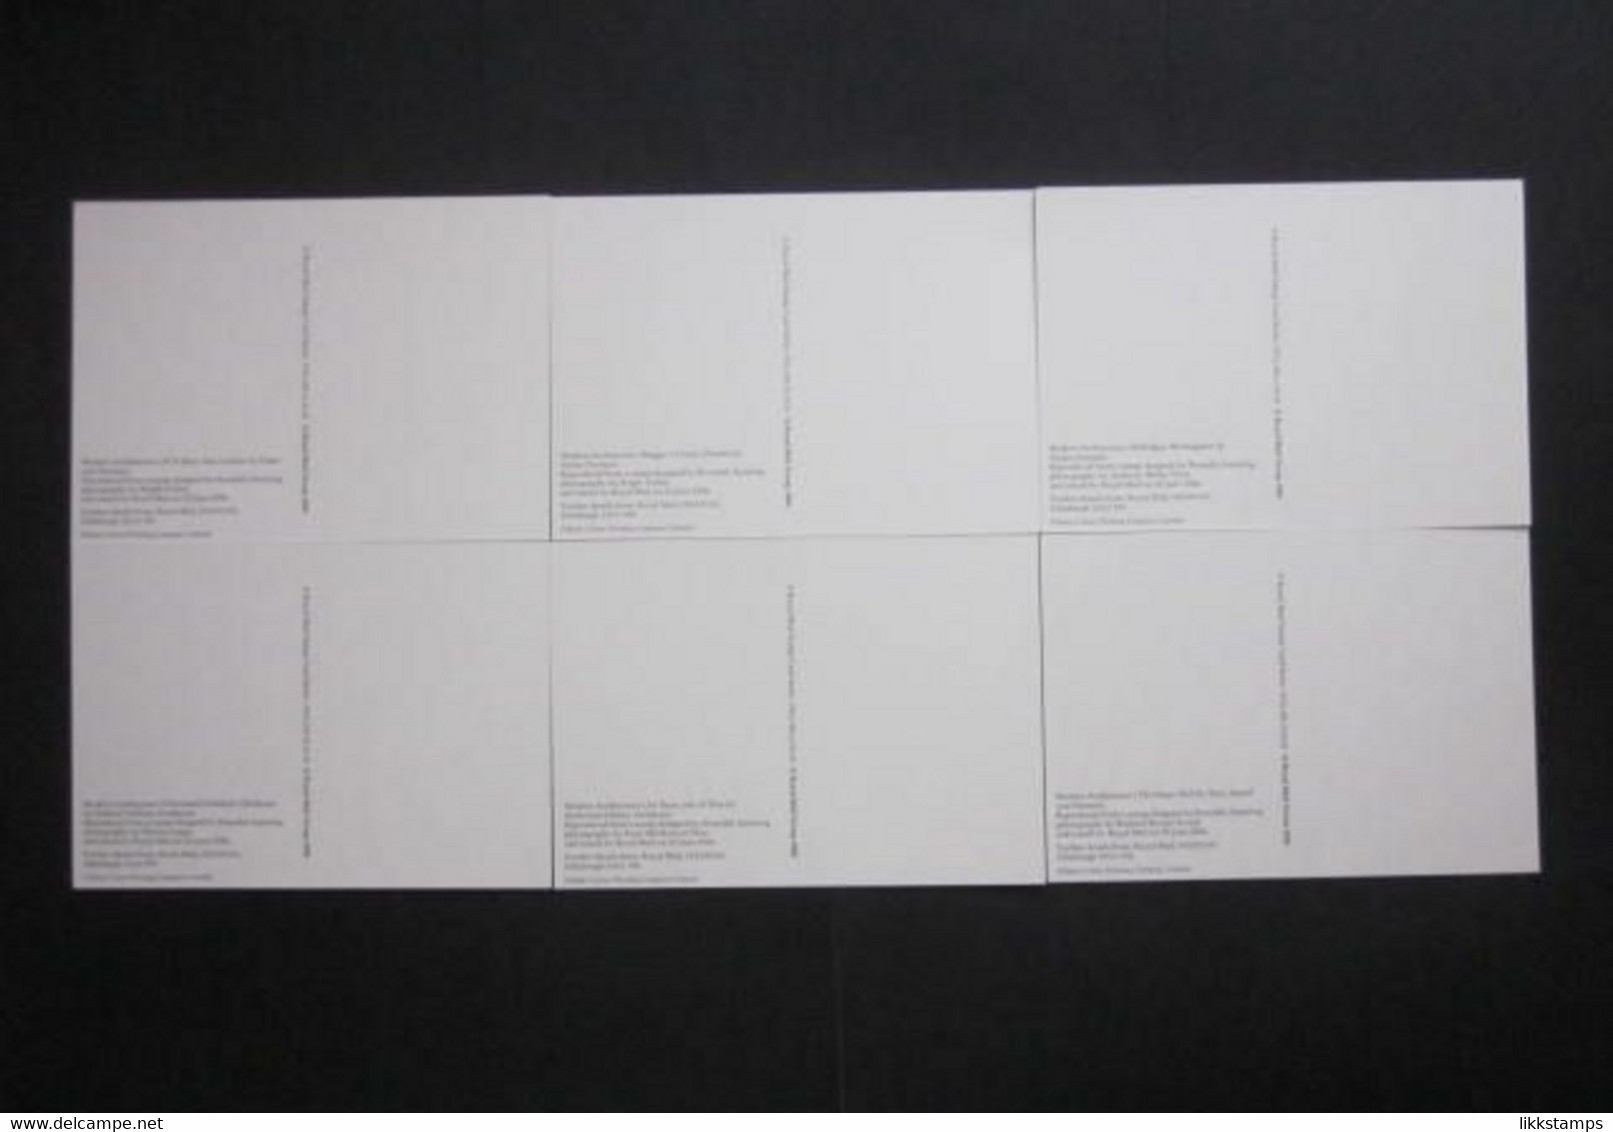 2006 MODERN ARCHITECTURE P.H.Q. CARDS UNUSED, ISSUE No. 288 (B) #00791 - Cartes PHQ